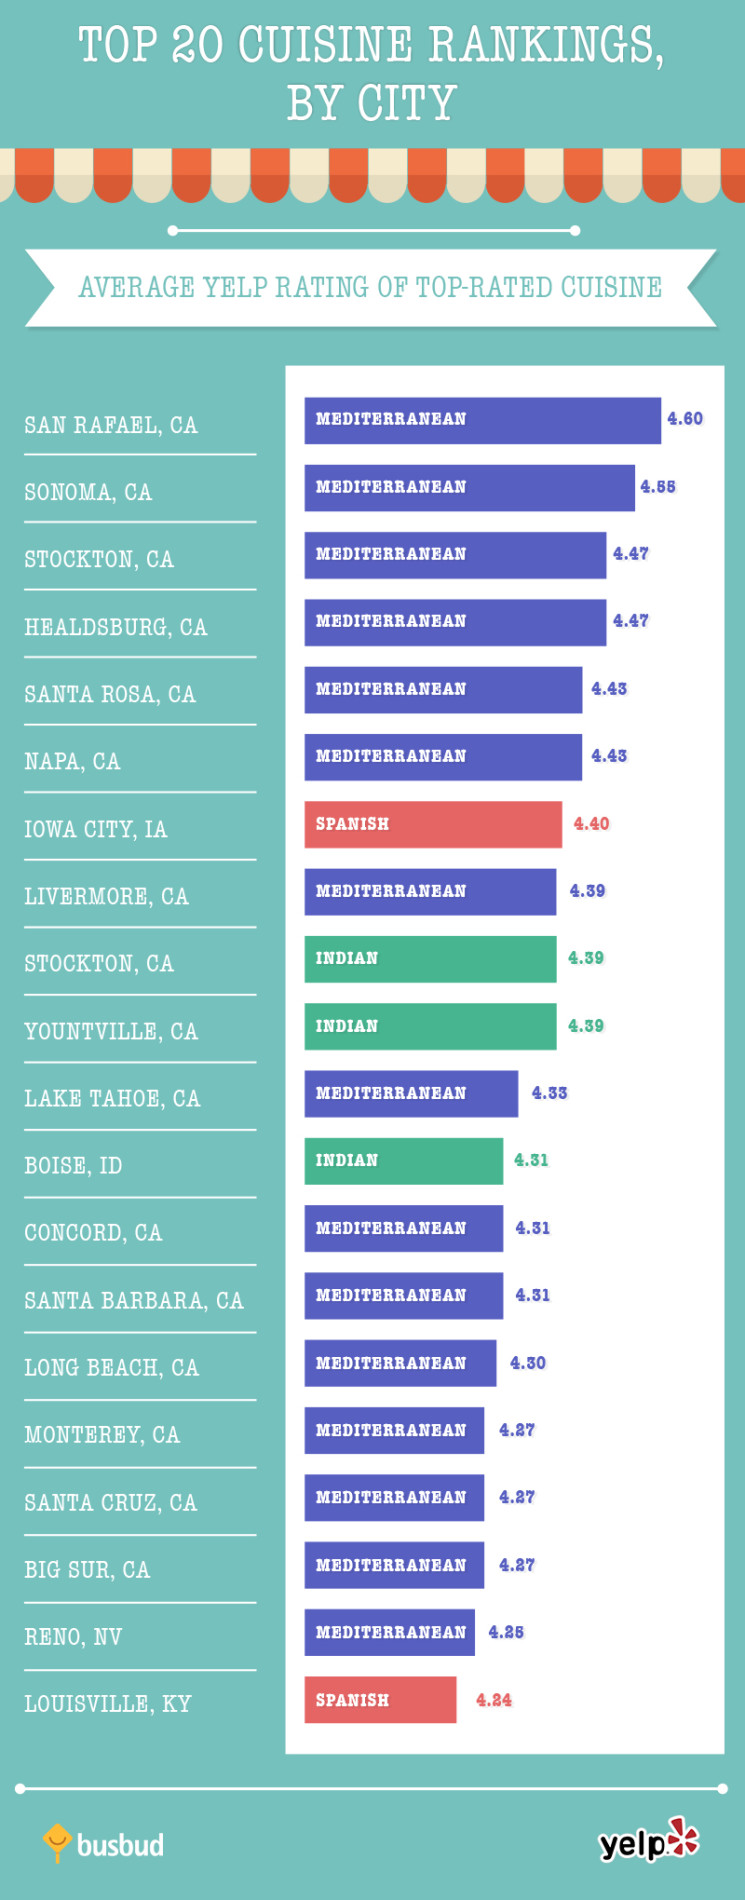 Top 20 cuisine rankings by city in the USA